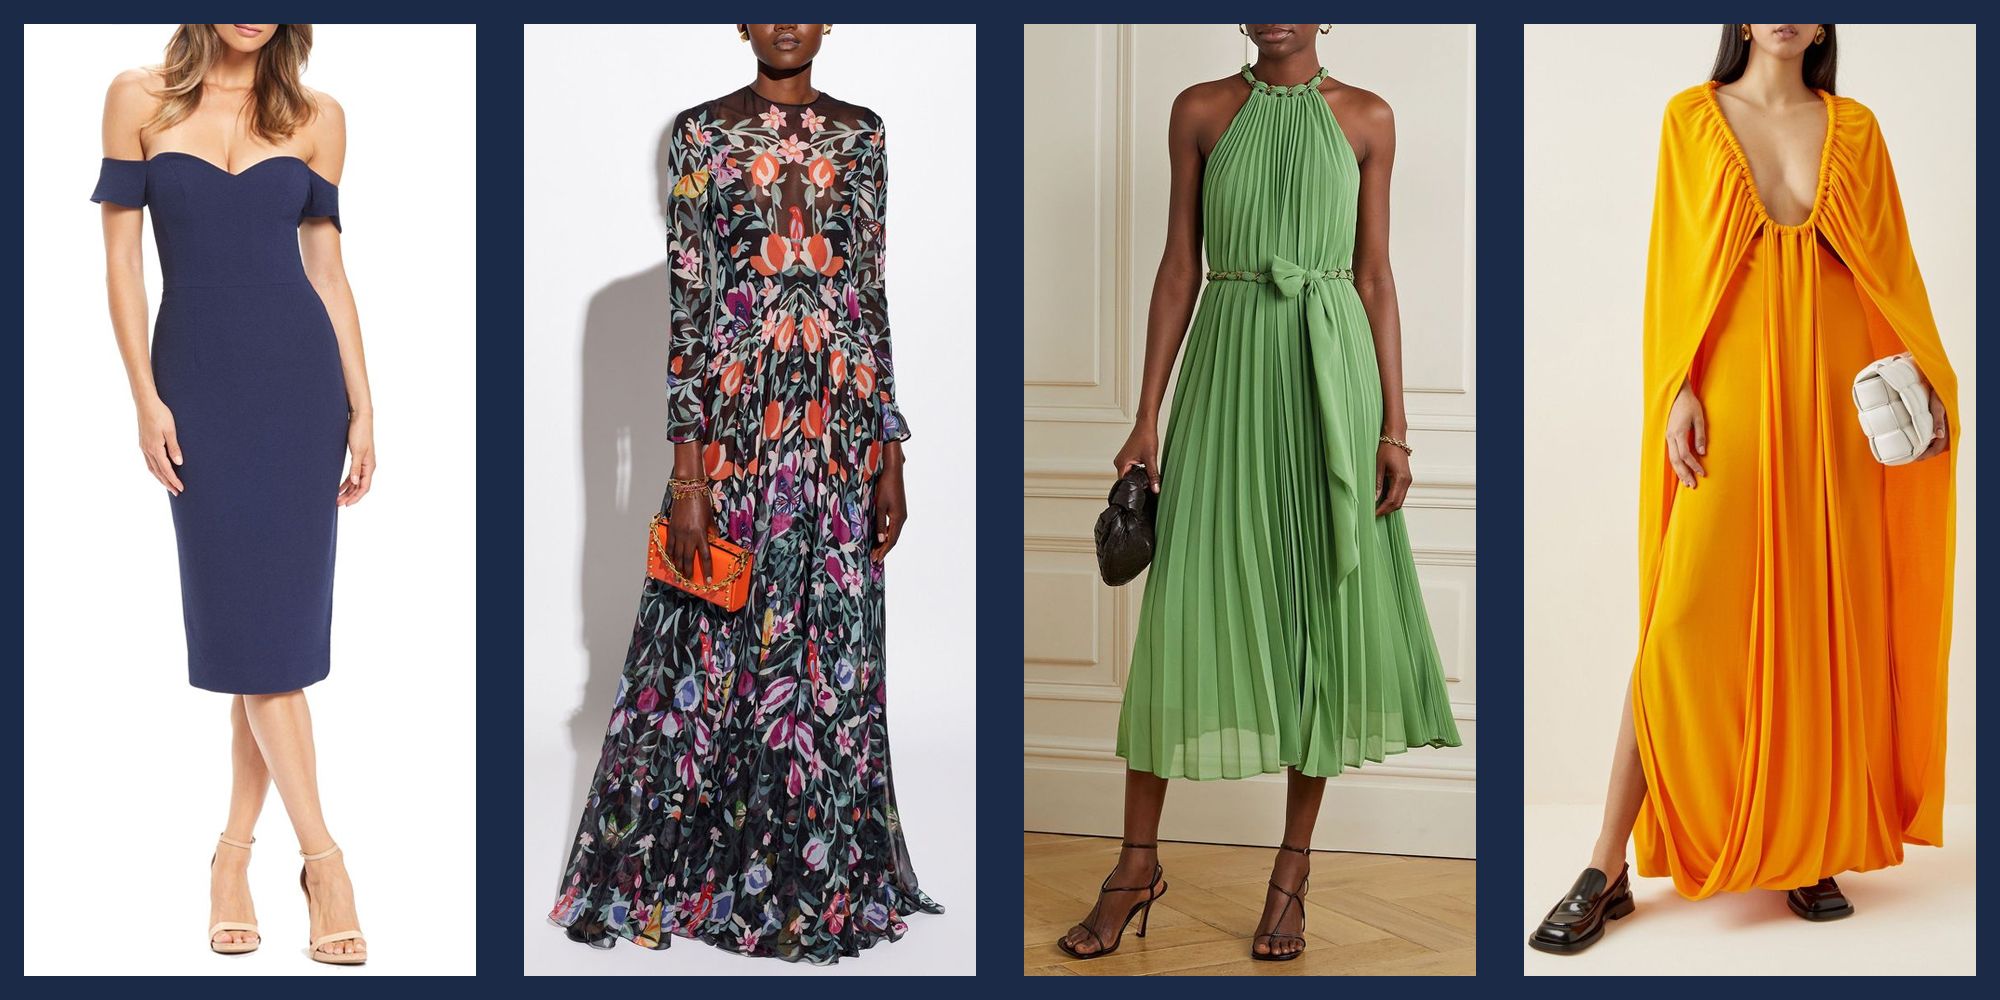 Spring Wedding Guest Dresses - The Motherchic